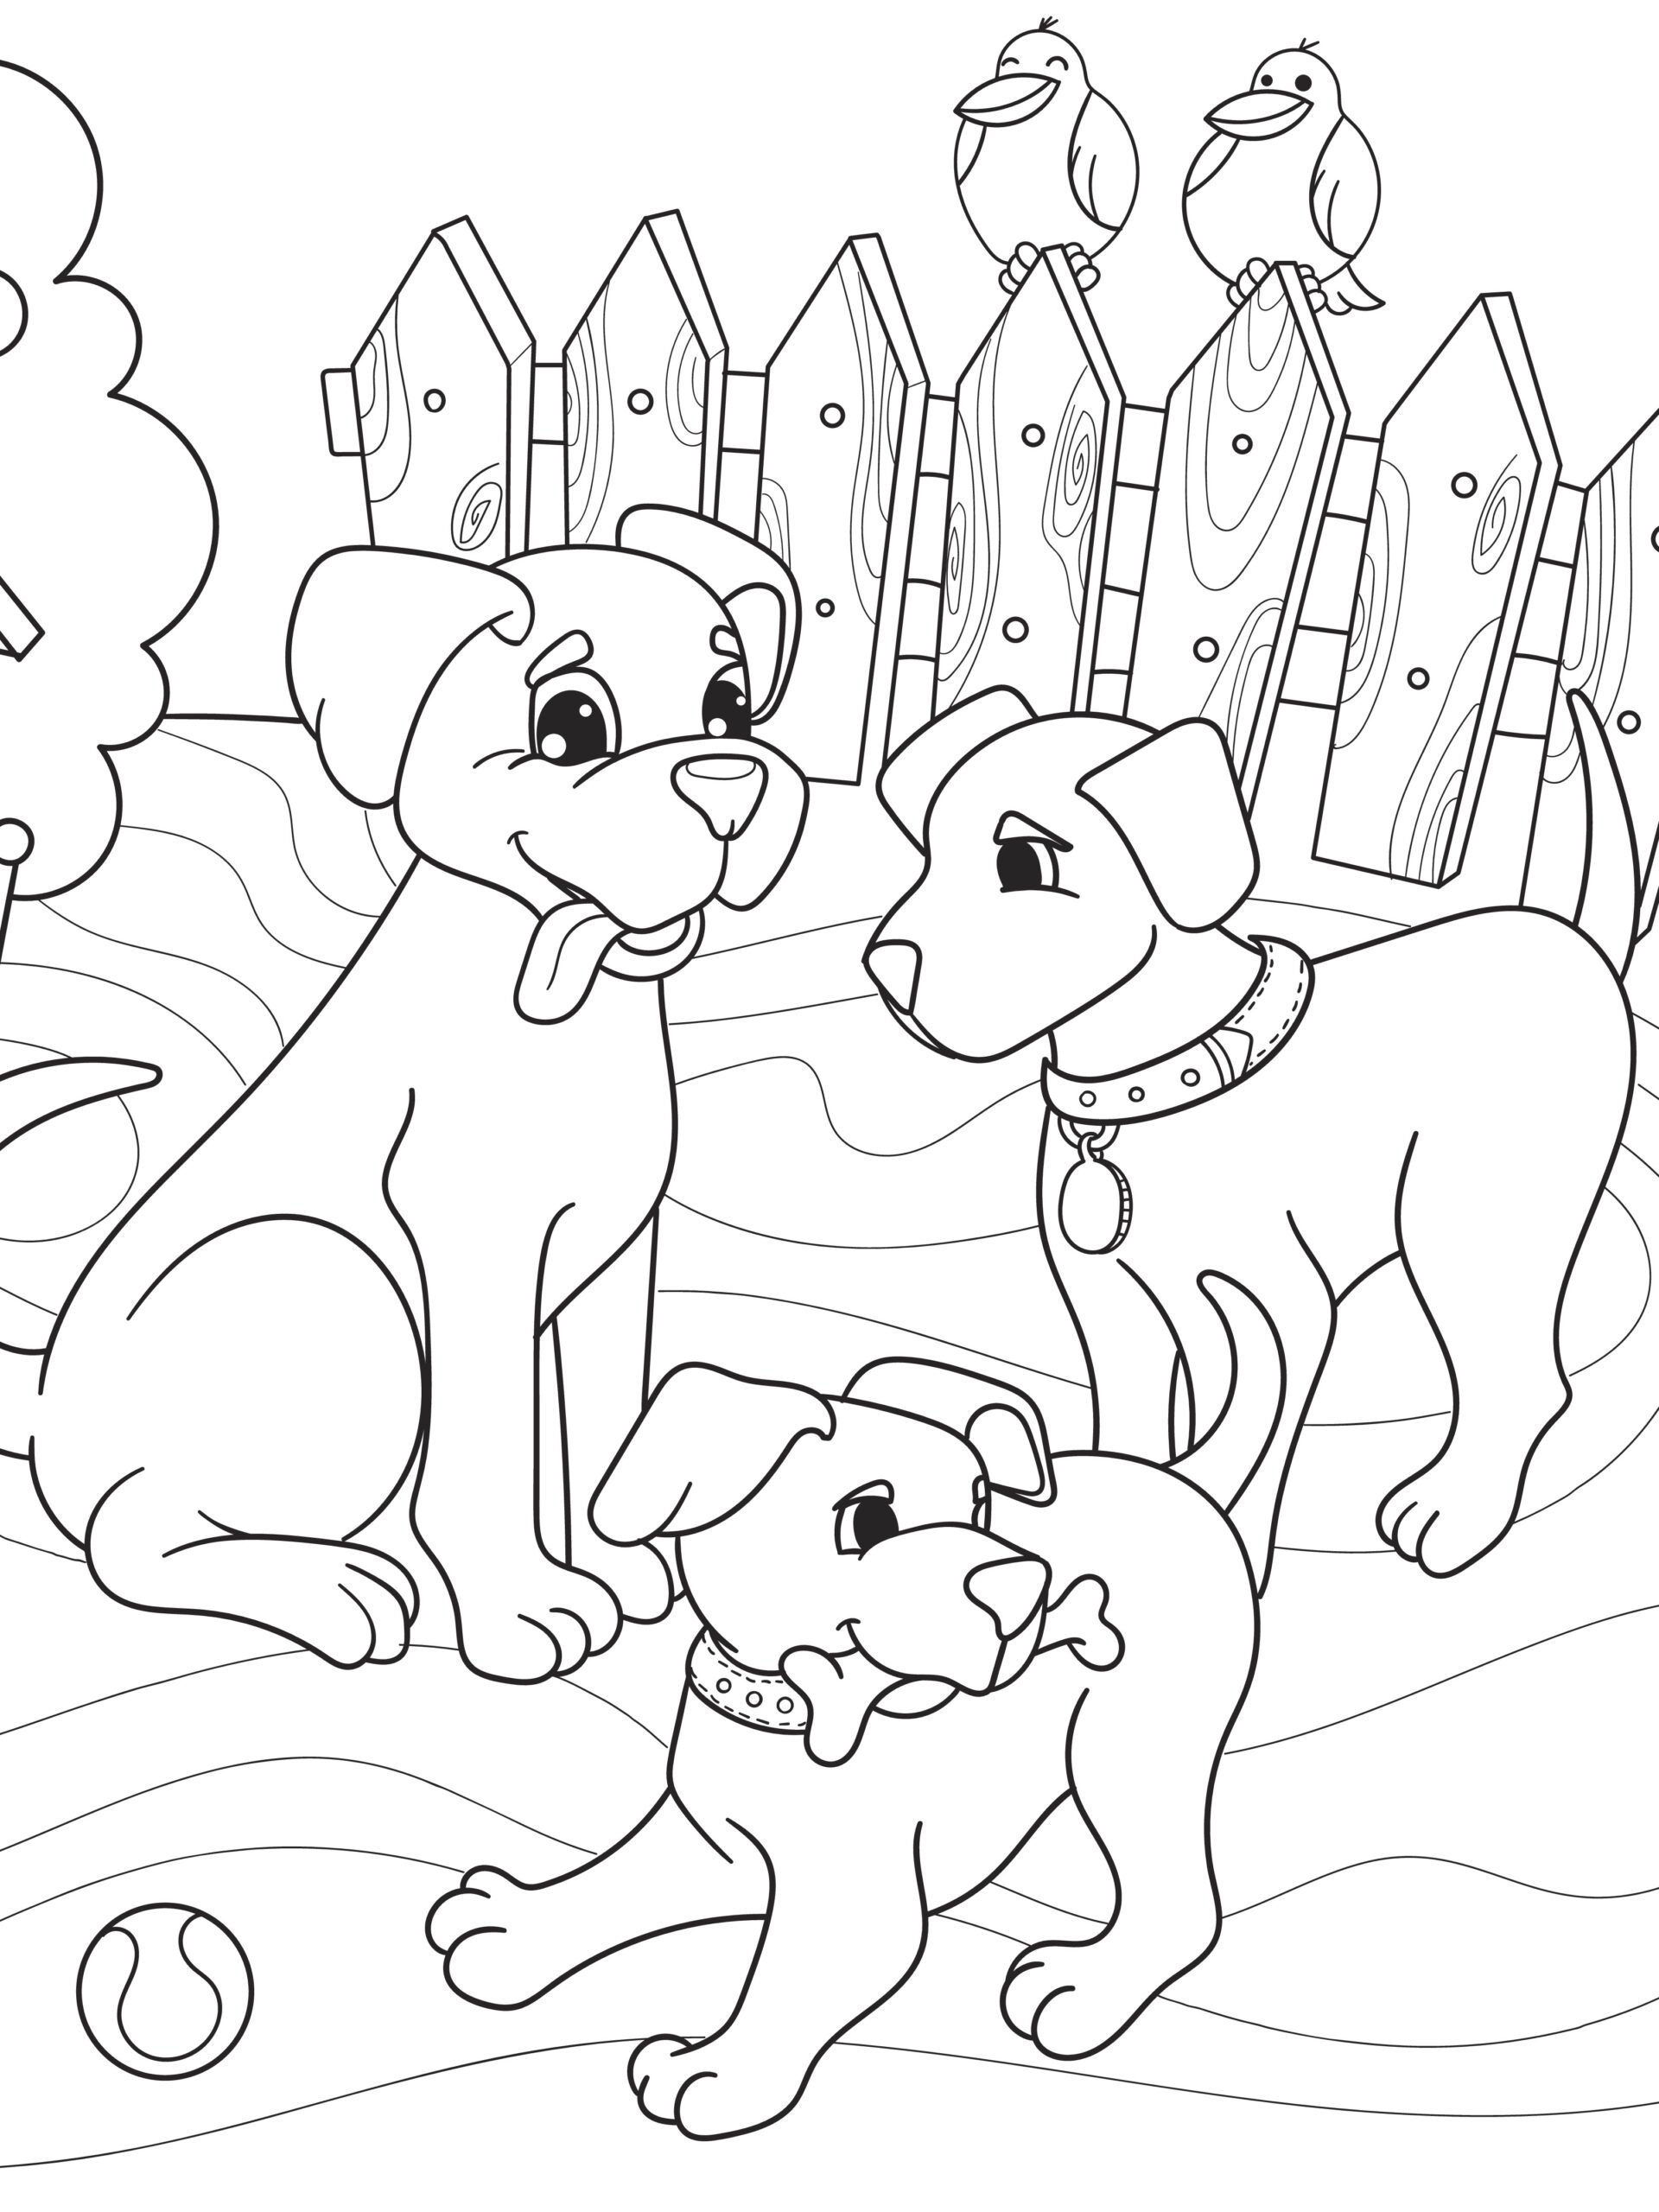 Wagging dog family coloring page